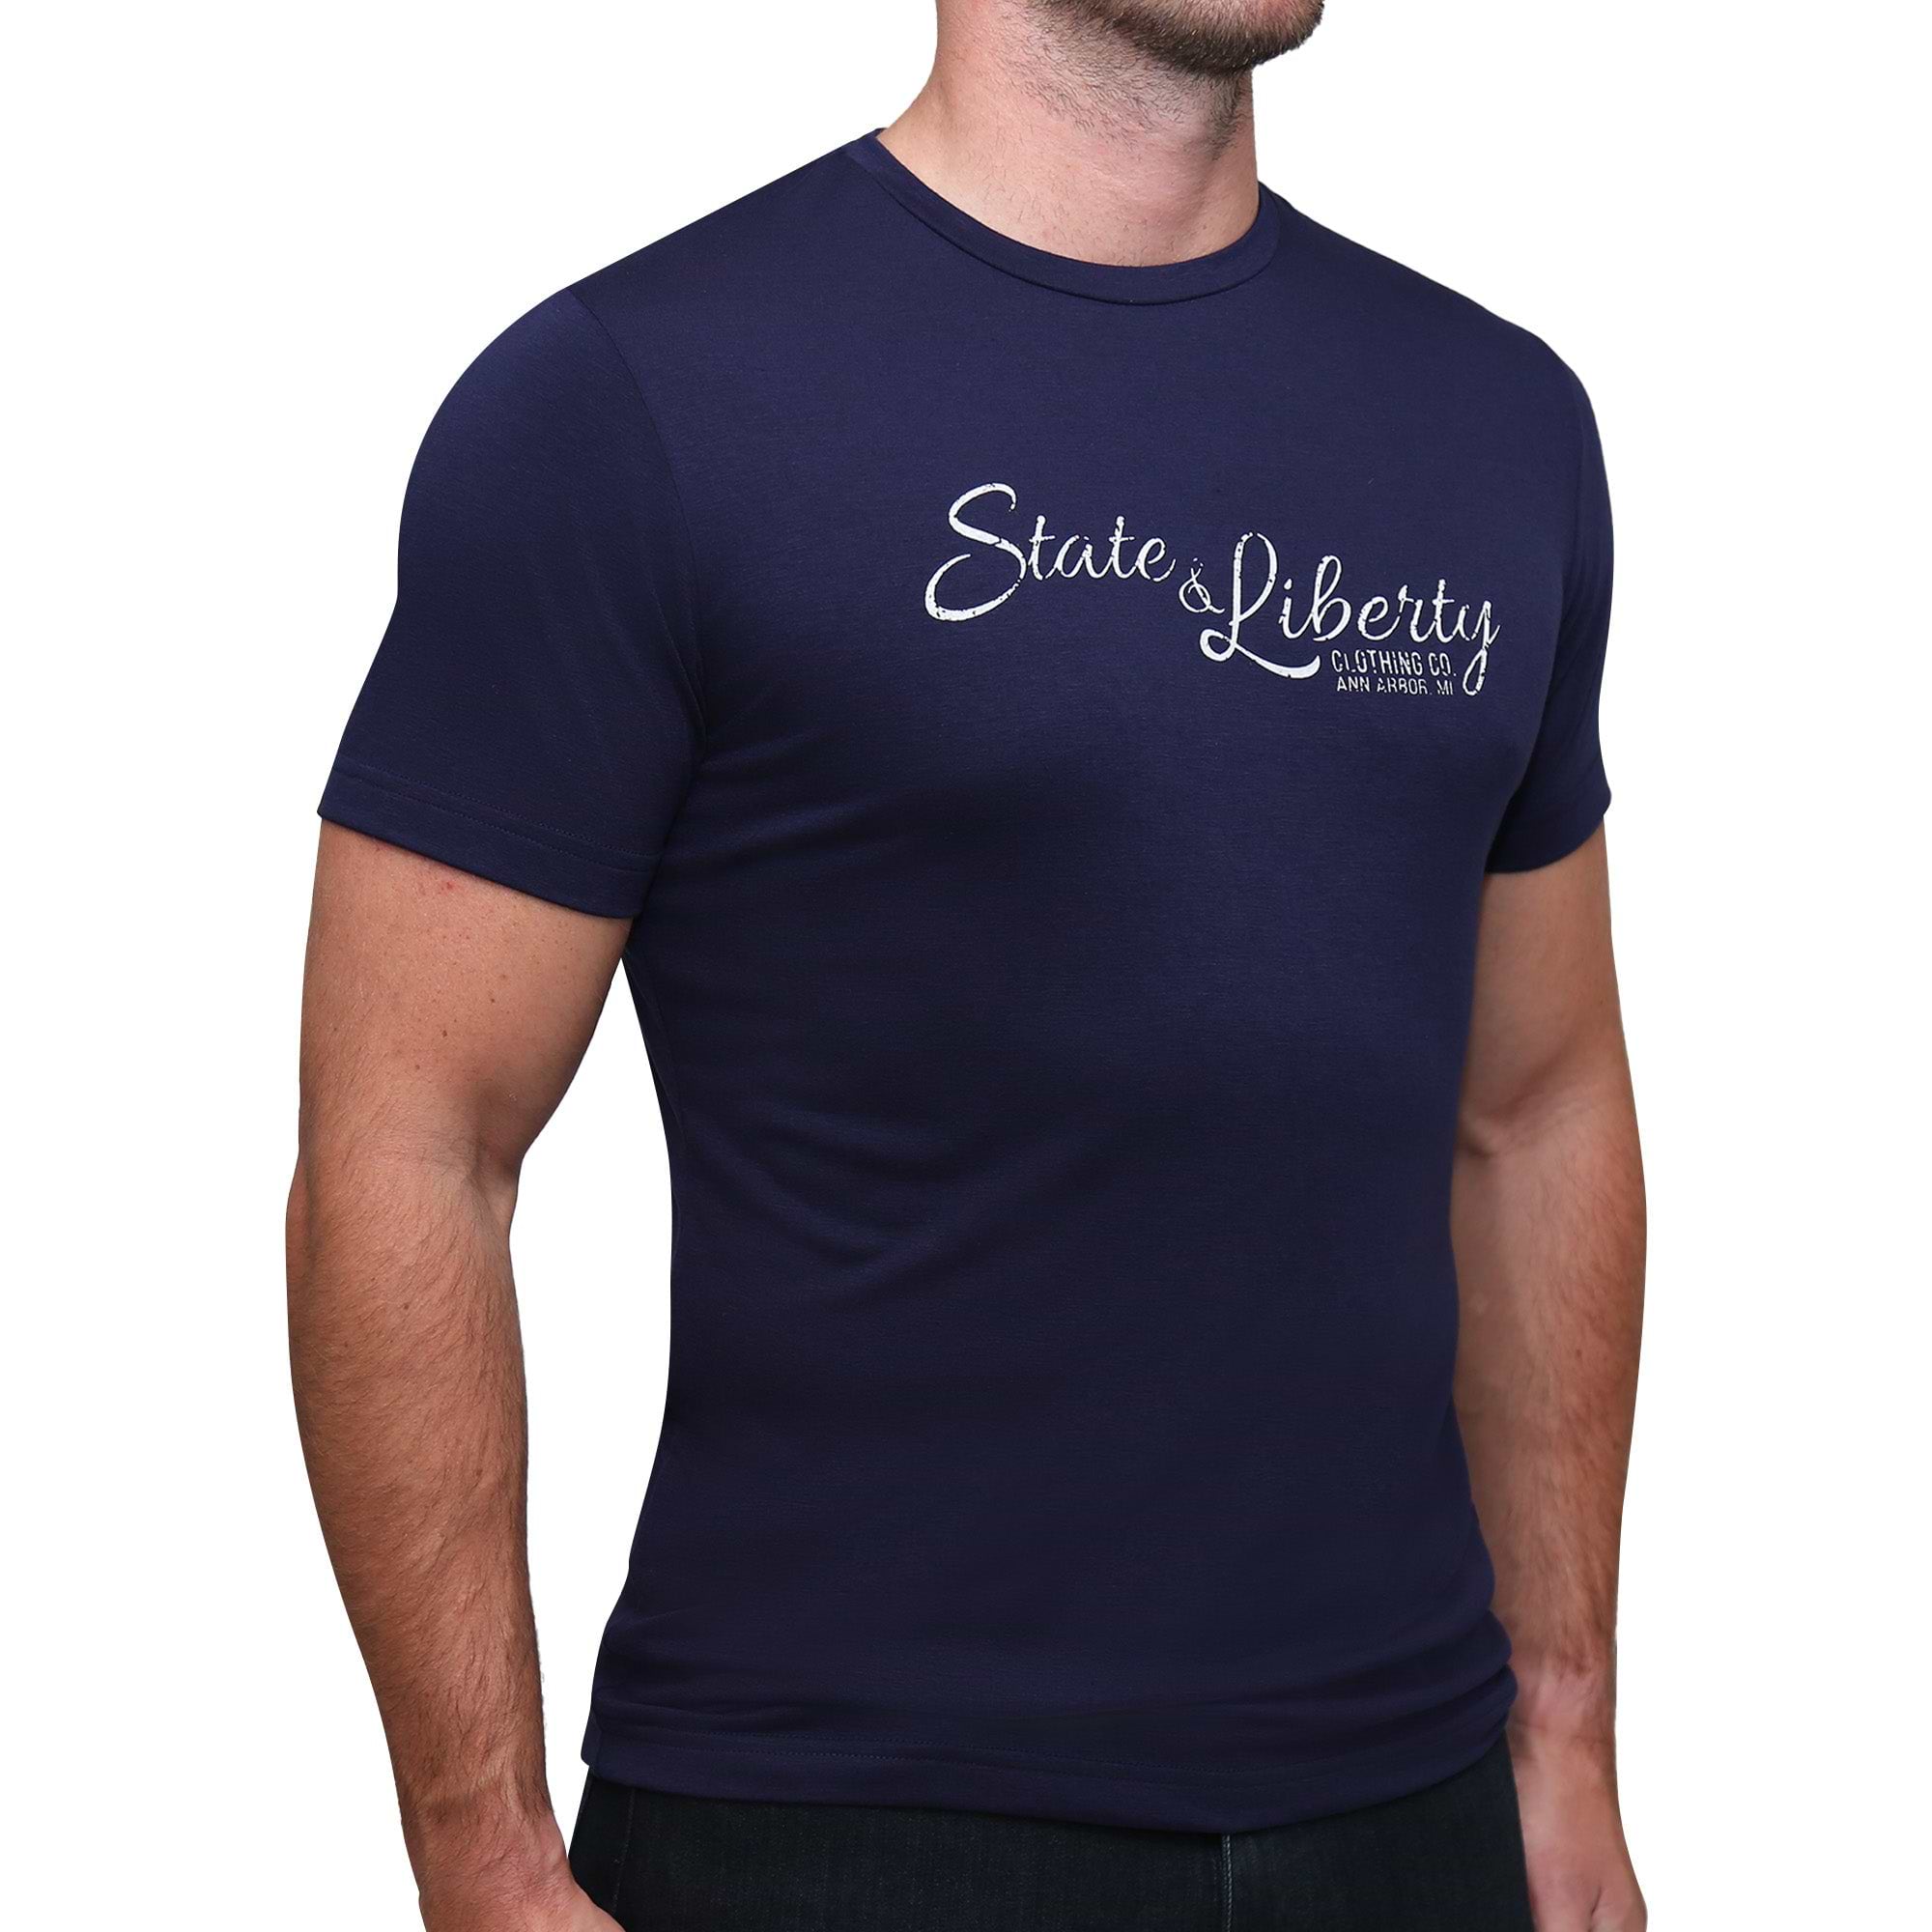 Athletic Fit T-Shirts by State & Liberty Clothing